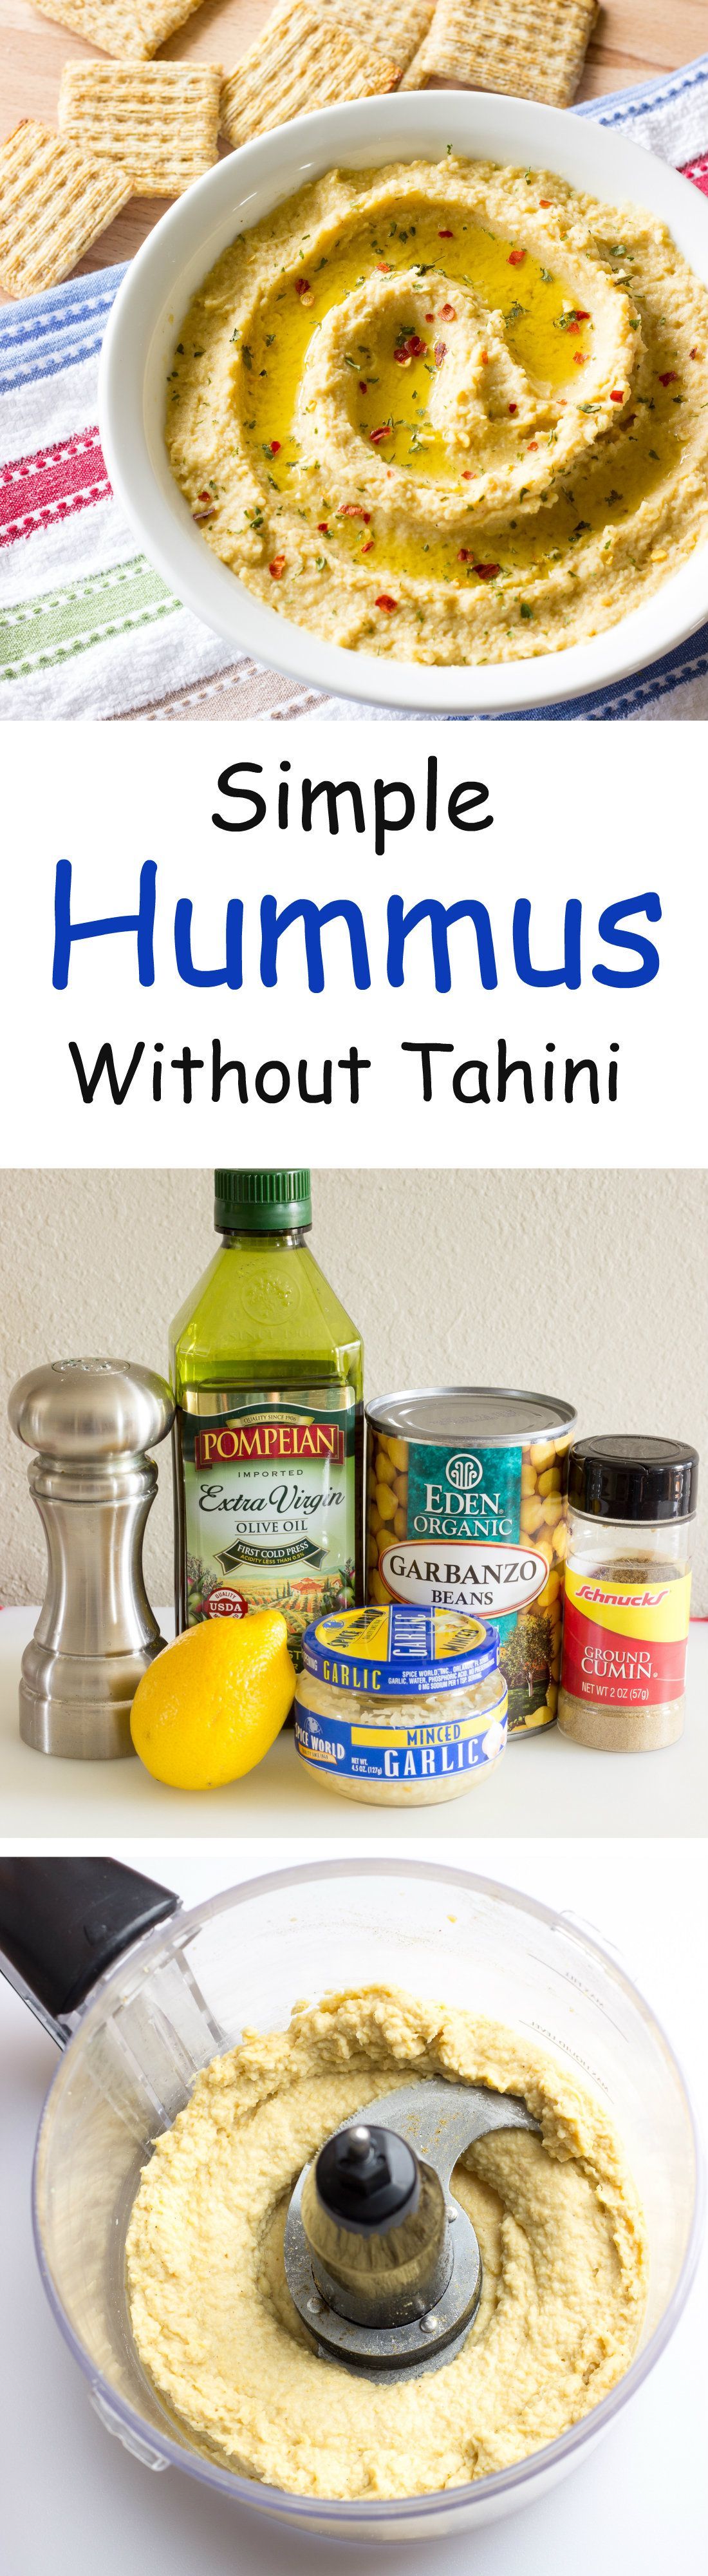 This simple hummus without tahini takes 5 minutes to prepare, uses common ingredients, and is so much cheaper than the packaged